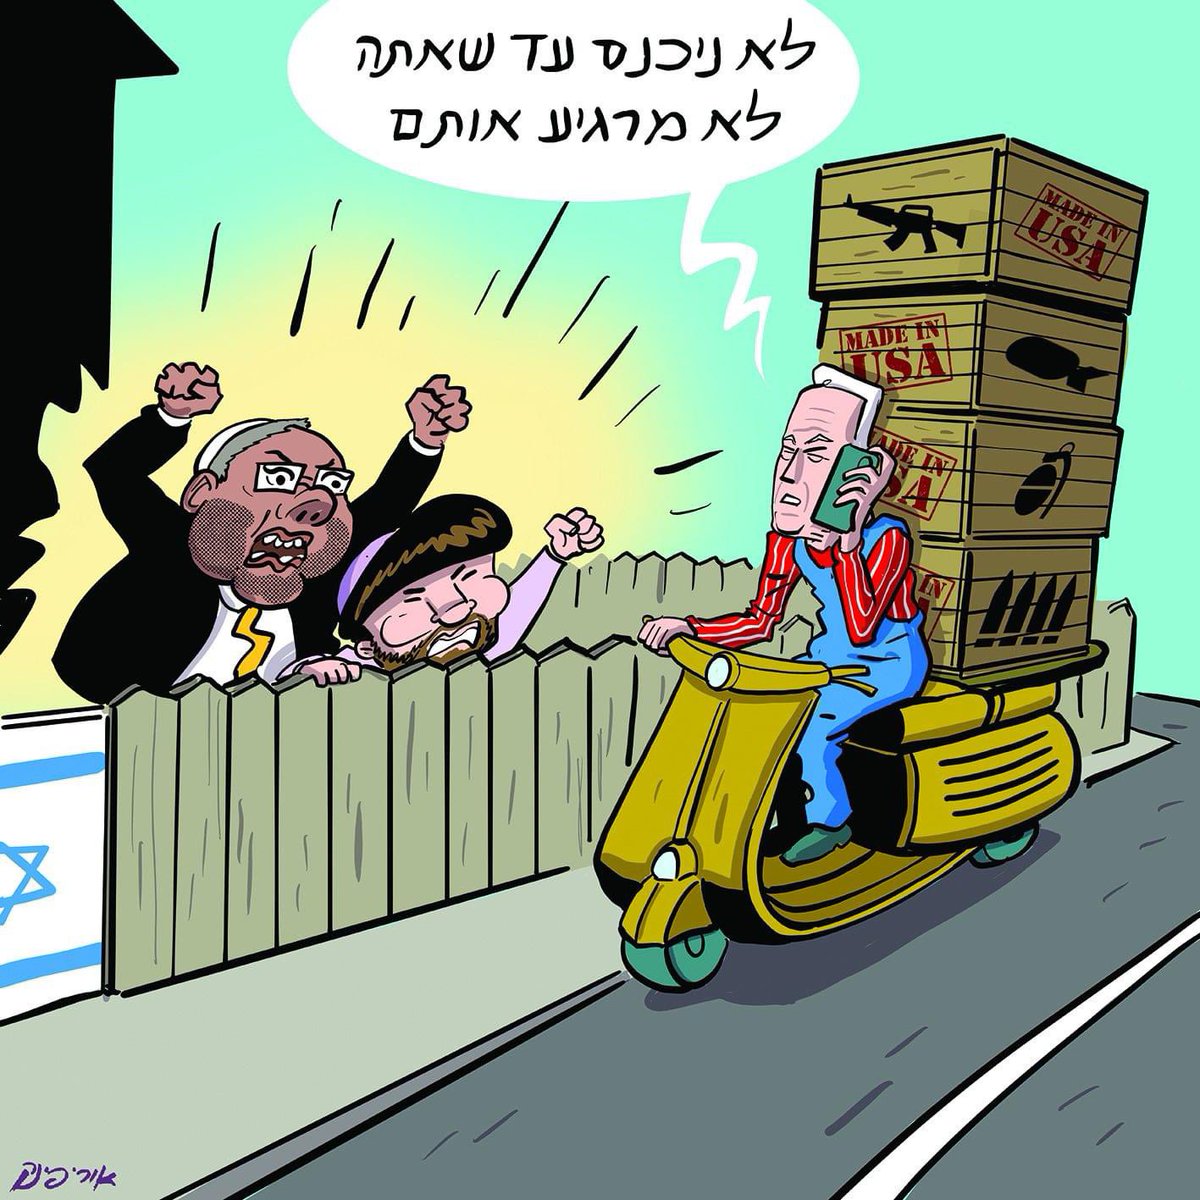 #caricature: 'We won't go in until you calm them down.'

Illustration by @zbengolem my favorite Israeli illustrator. You are welcome to follow him, he always has something to say and he illustrates it in a cynical and pleasant way :)